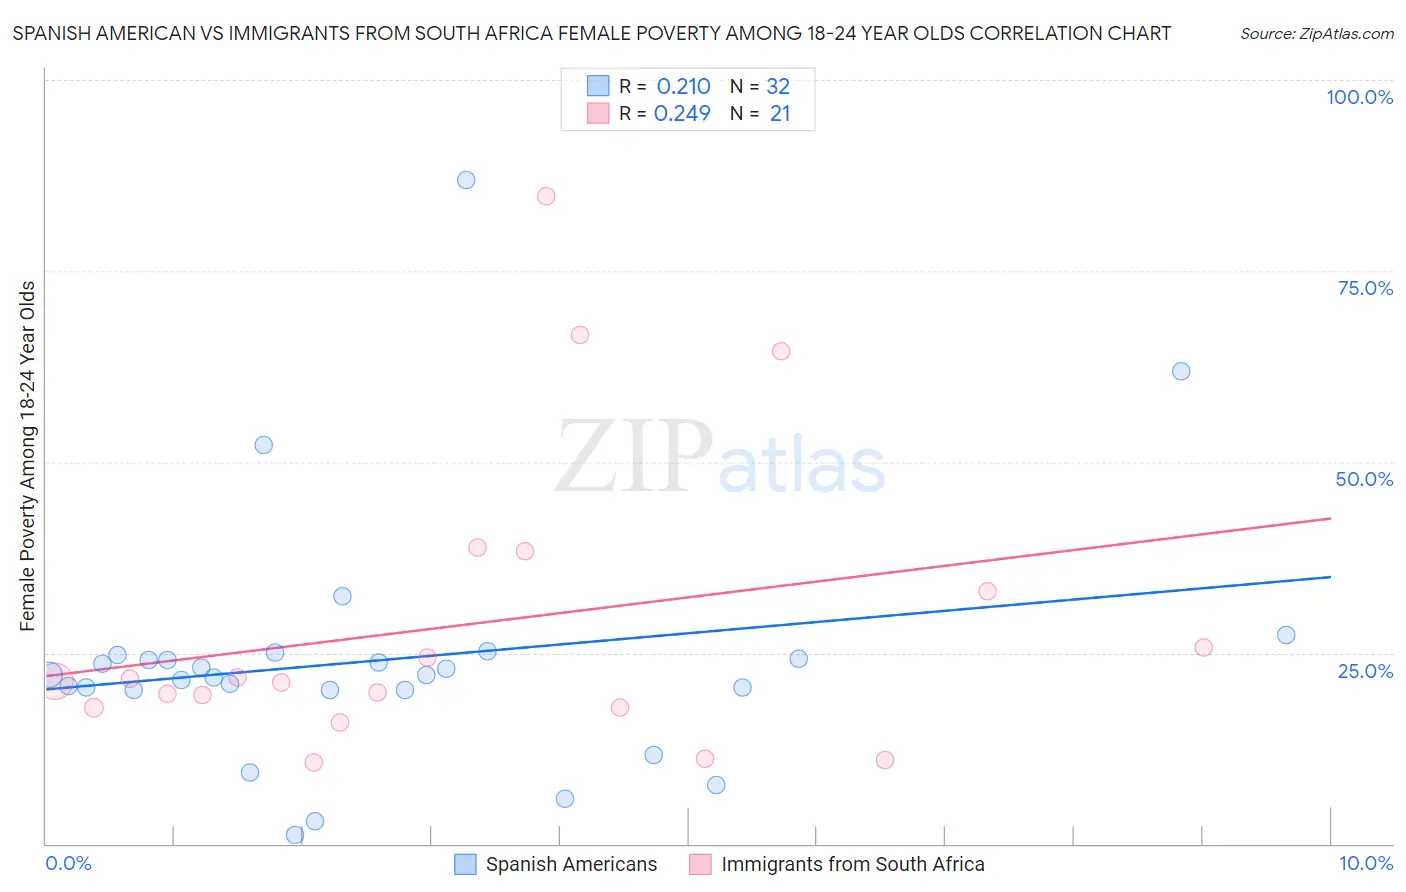 Spanish American vs Immigrants from South Africa Female Poverty Among 18-24 Year Olds